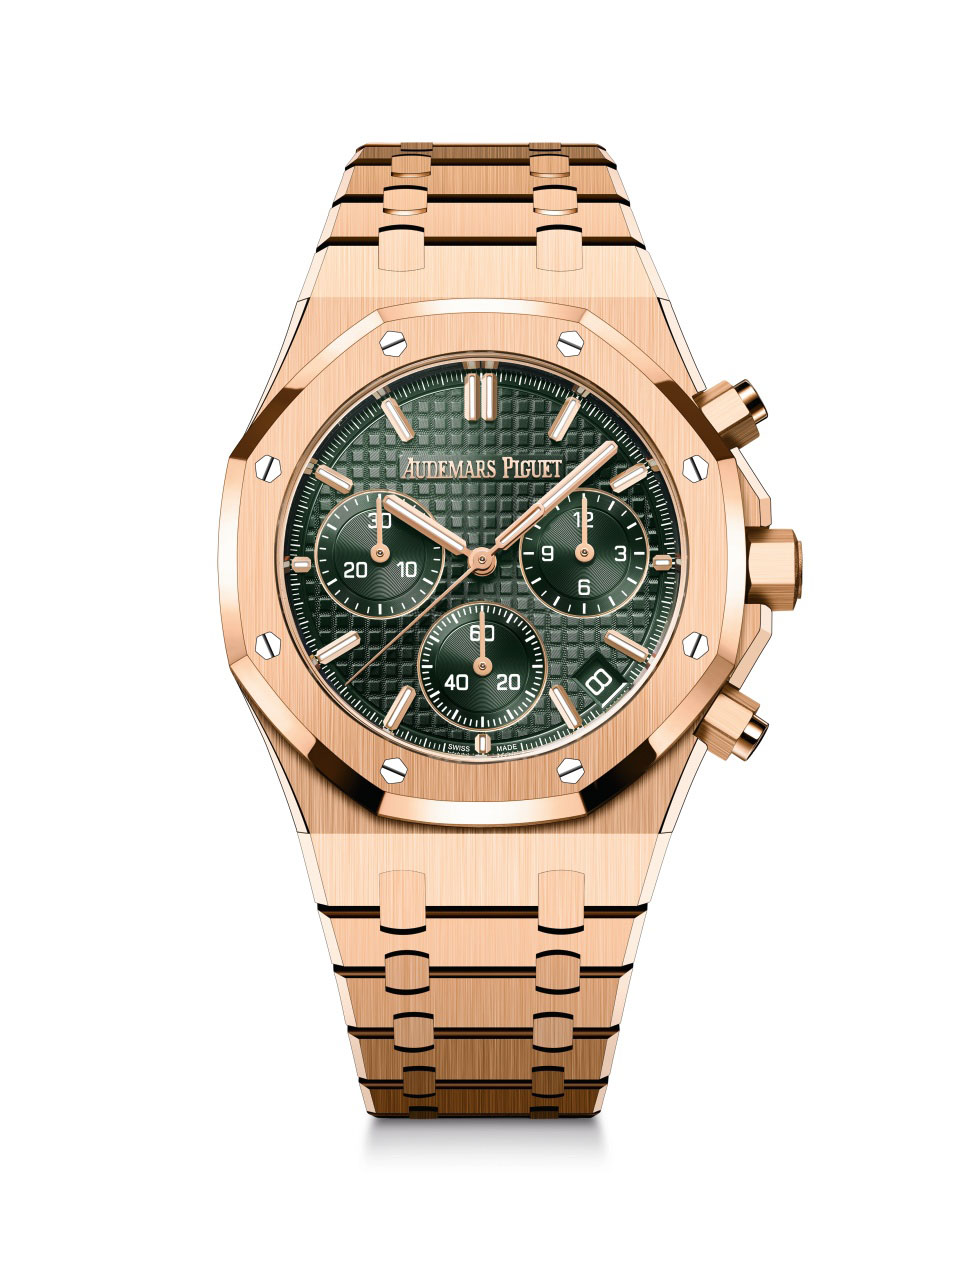 Royal Oak Selfwinding Chronograph / 41mm; 18-carat pink gold case with khaki green dial (26240OR.OO.1320OR.04)